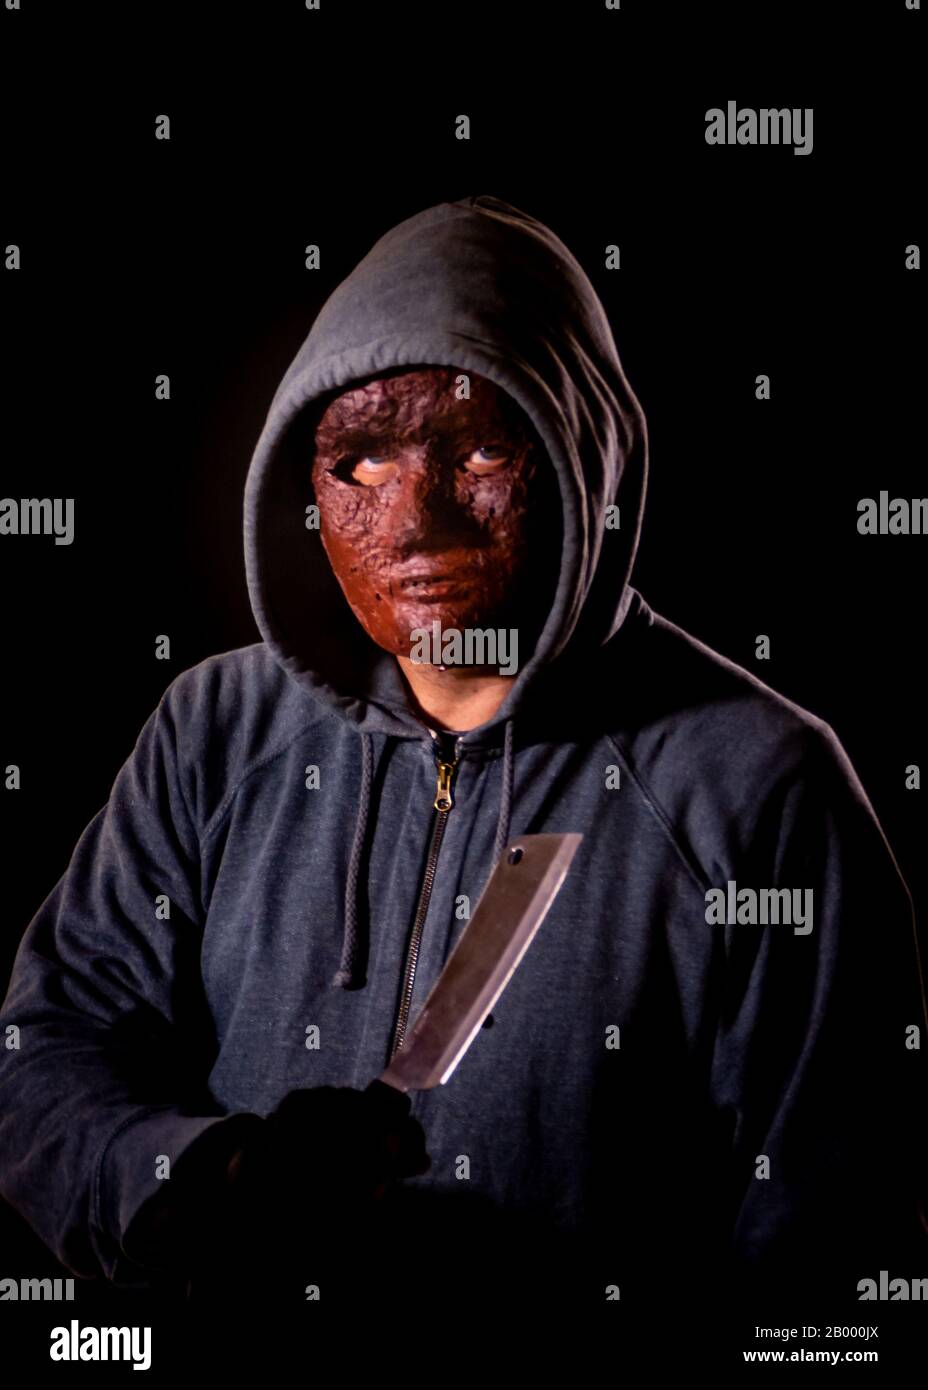 Scary killer in mask and hoodie holding knife Stock Photo